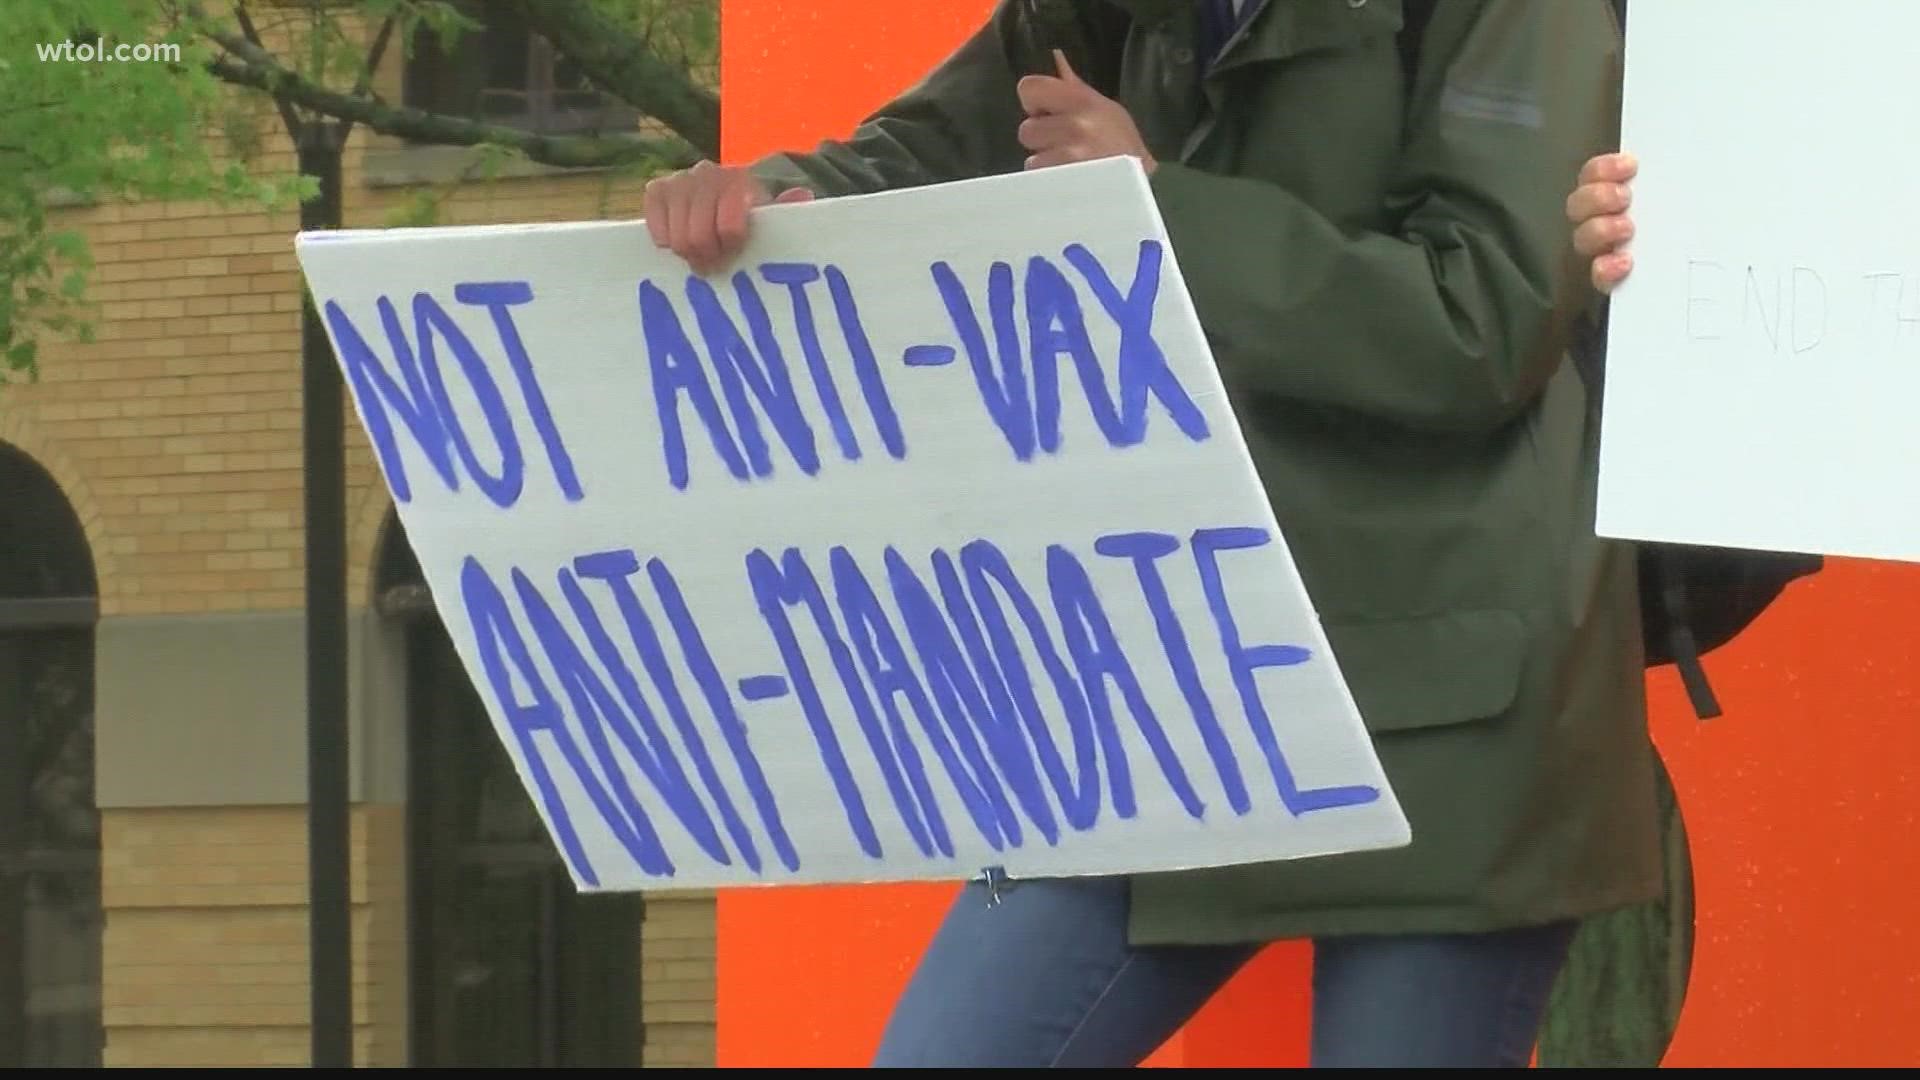 Students say they want to make sure it's known they are not "anti-vax," just anti-mandate.